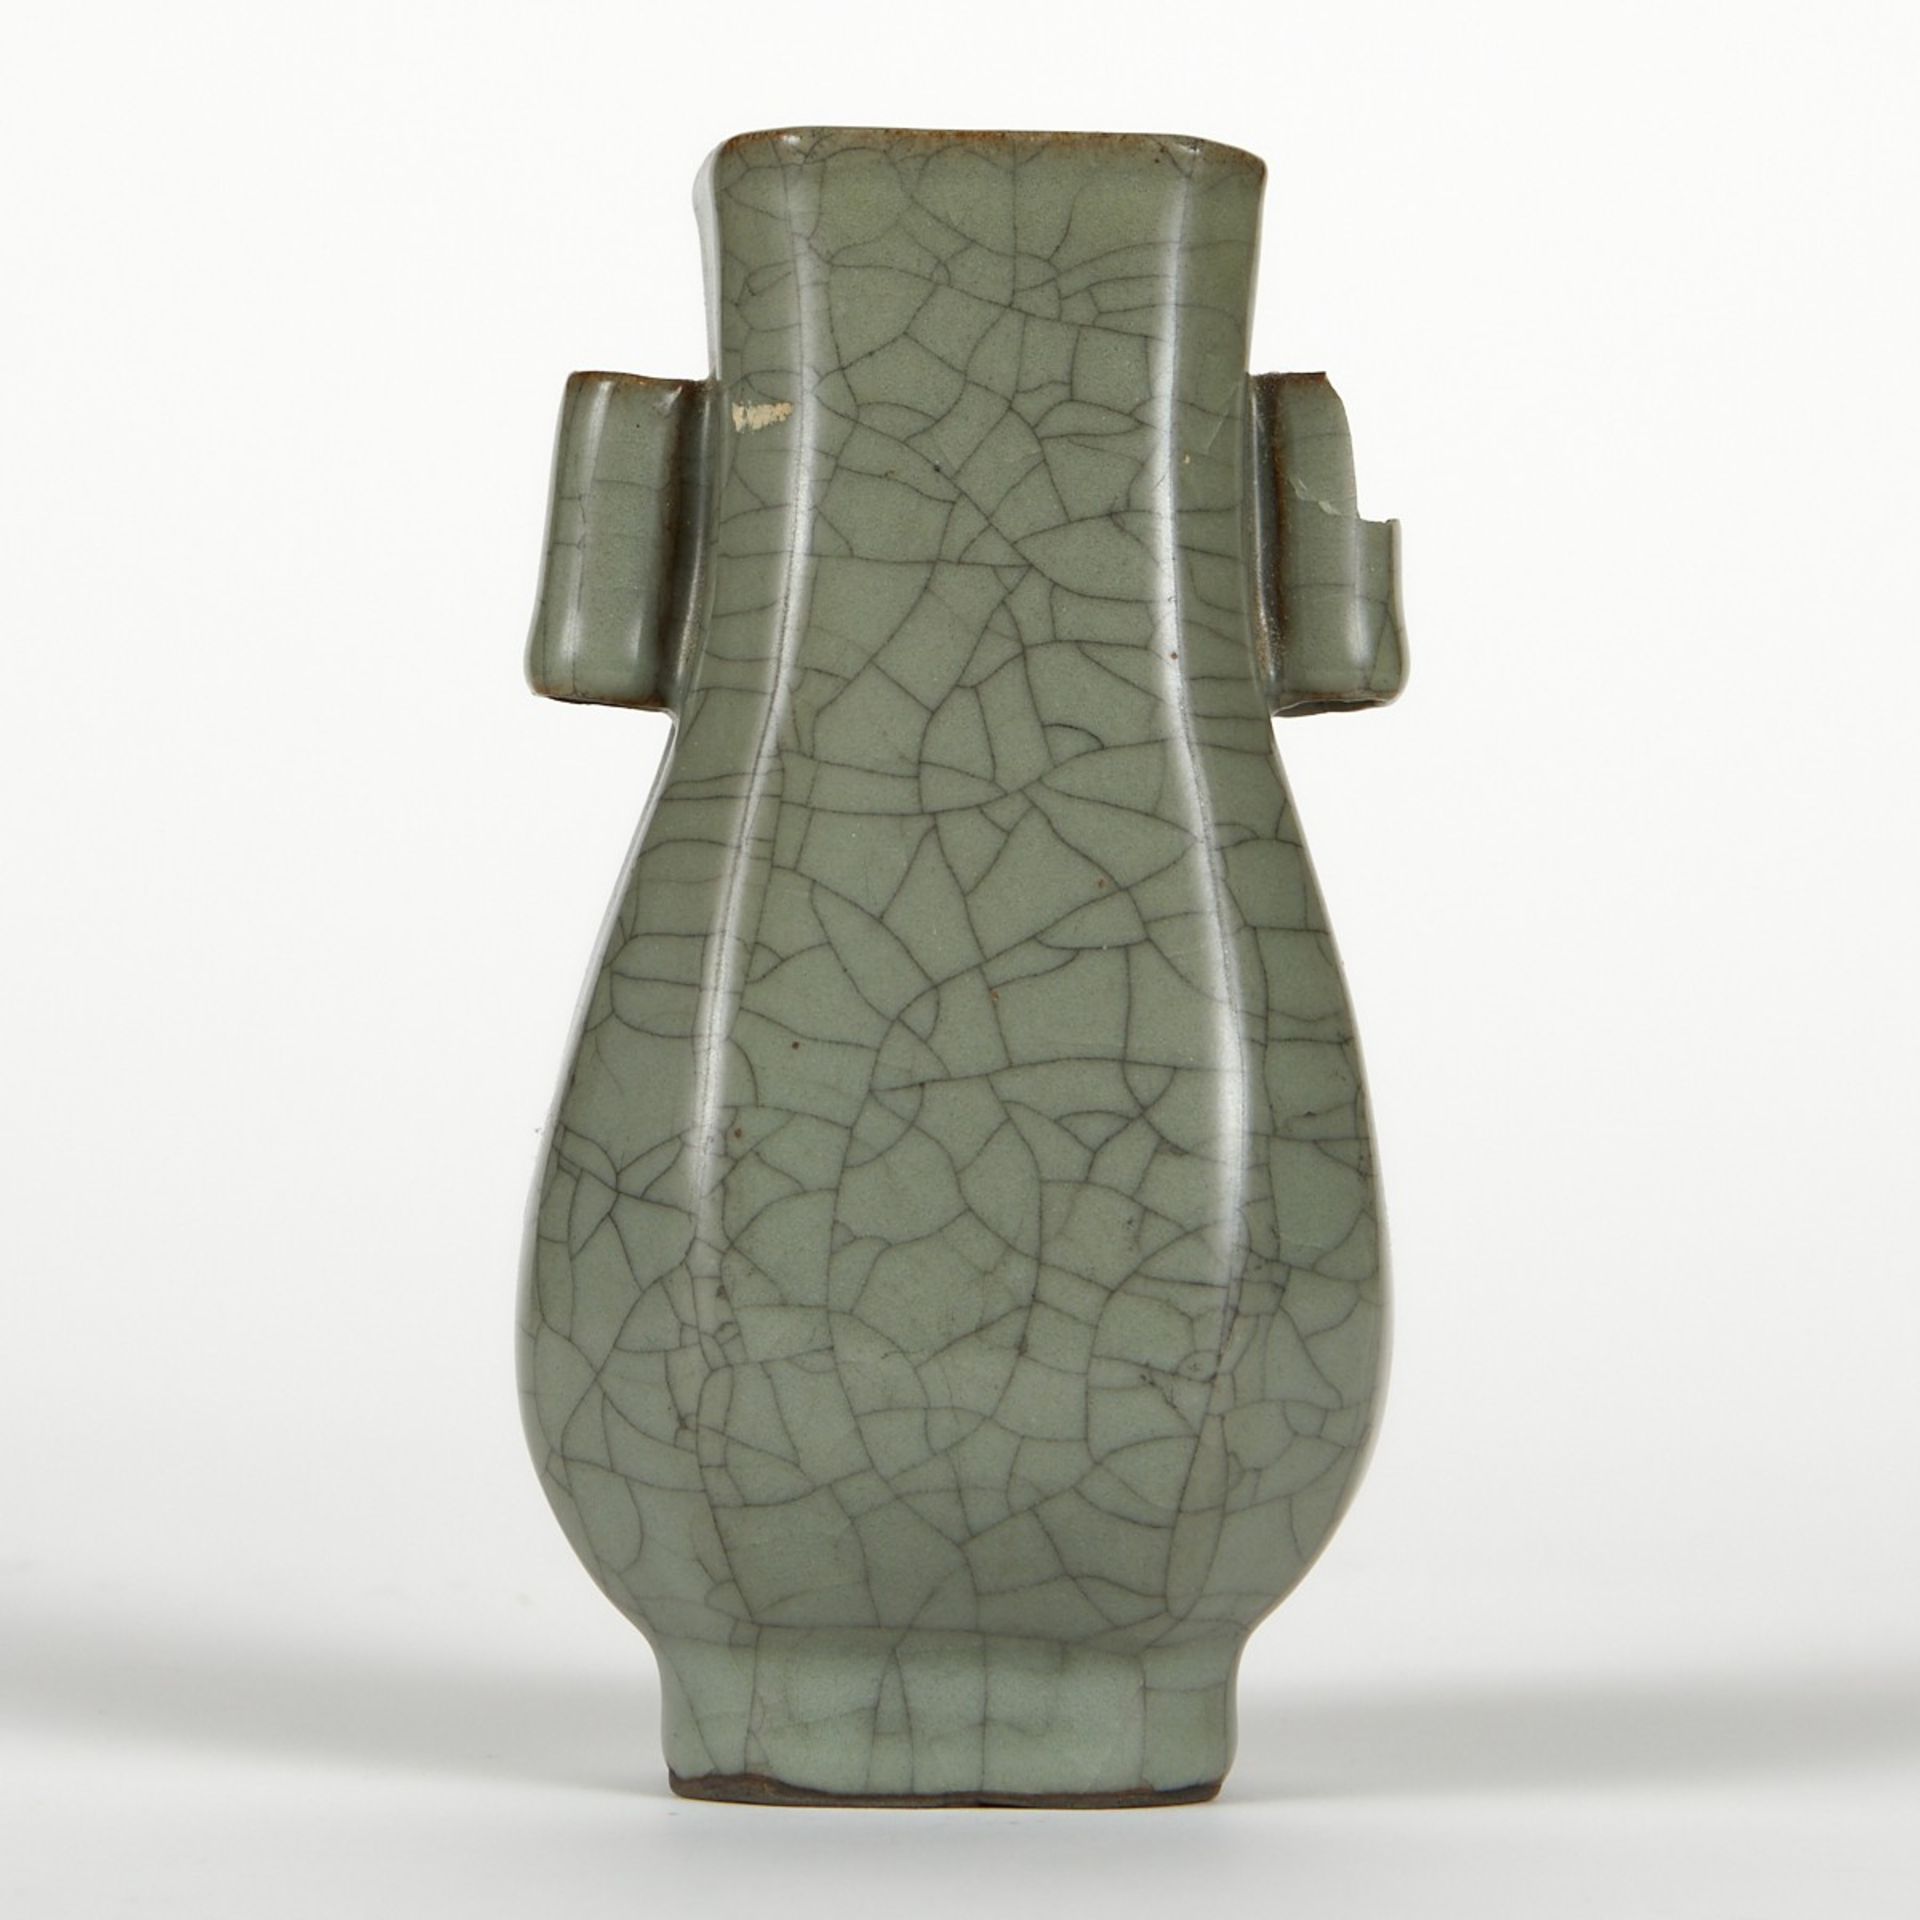 Chinese High Fired Ceramic Crackle Hu Vase - Image 4 of 7